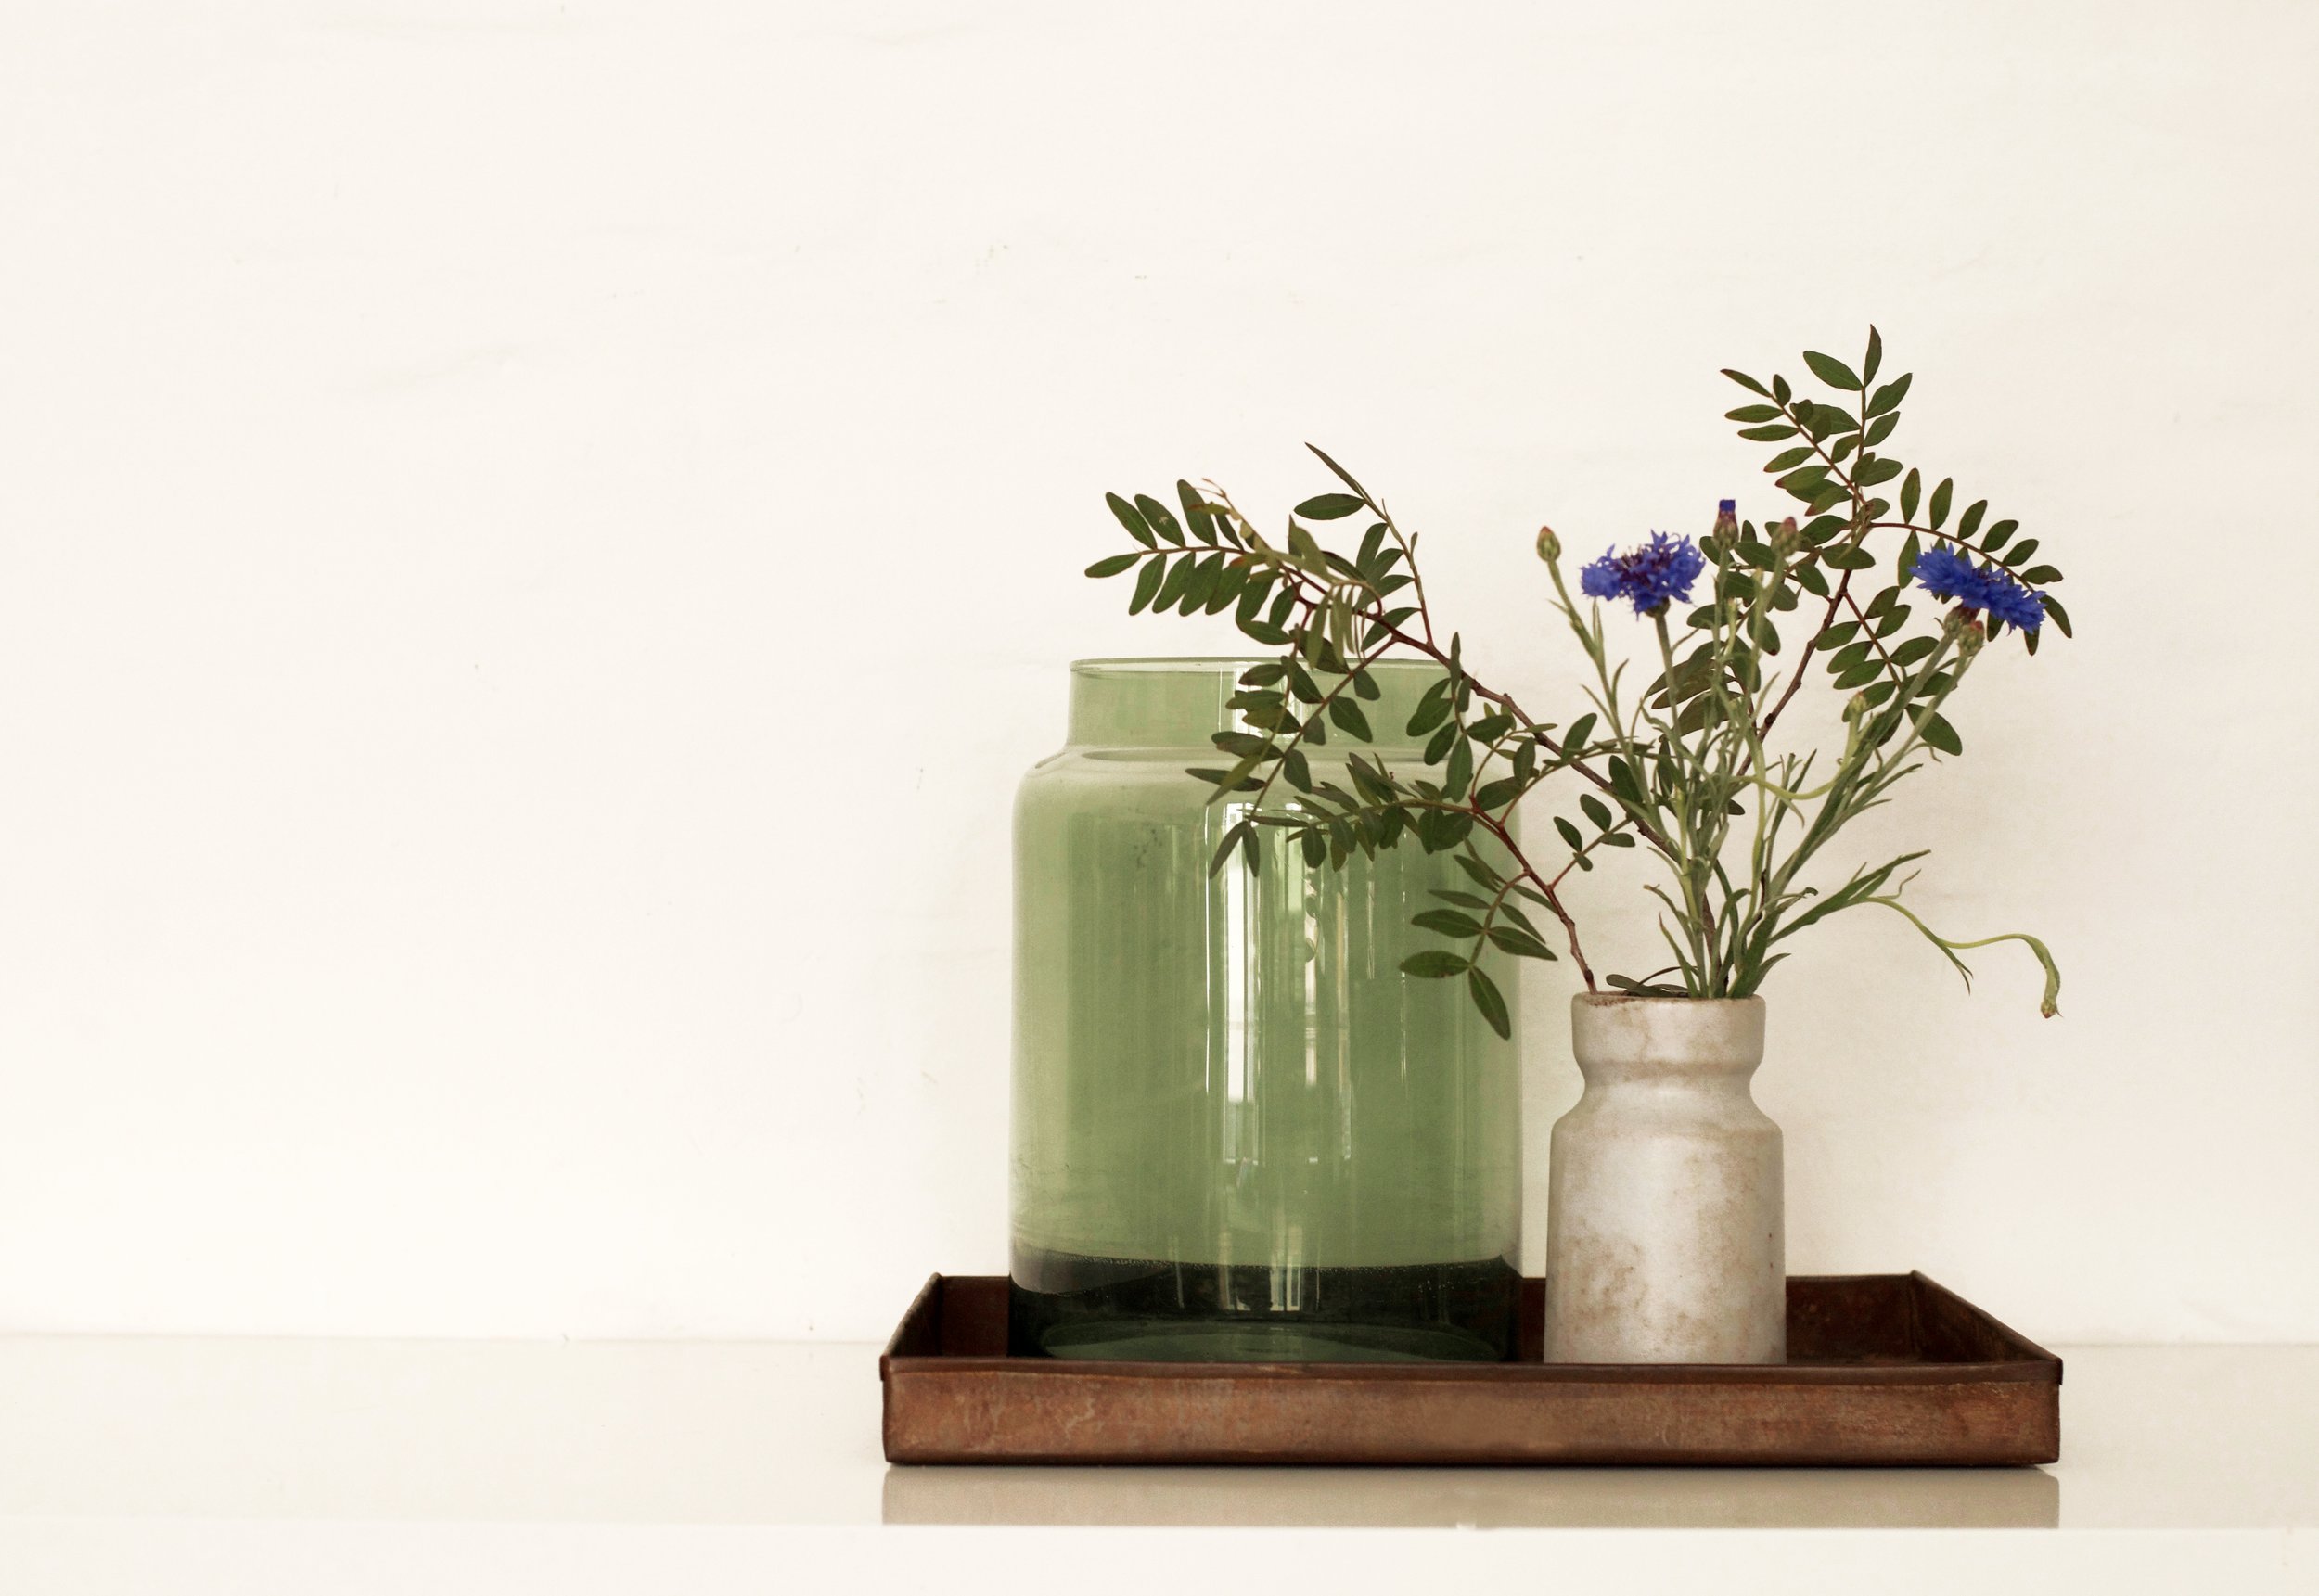 raini_peters_interior_design_and styling_berlin_home_styling_glass_concrete_flowervase.jpg